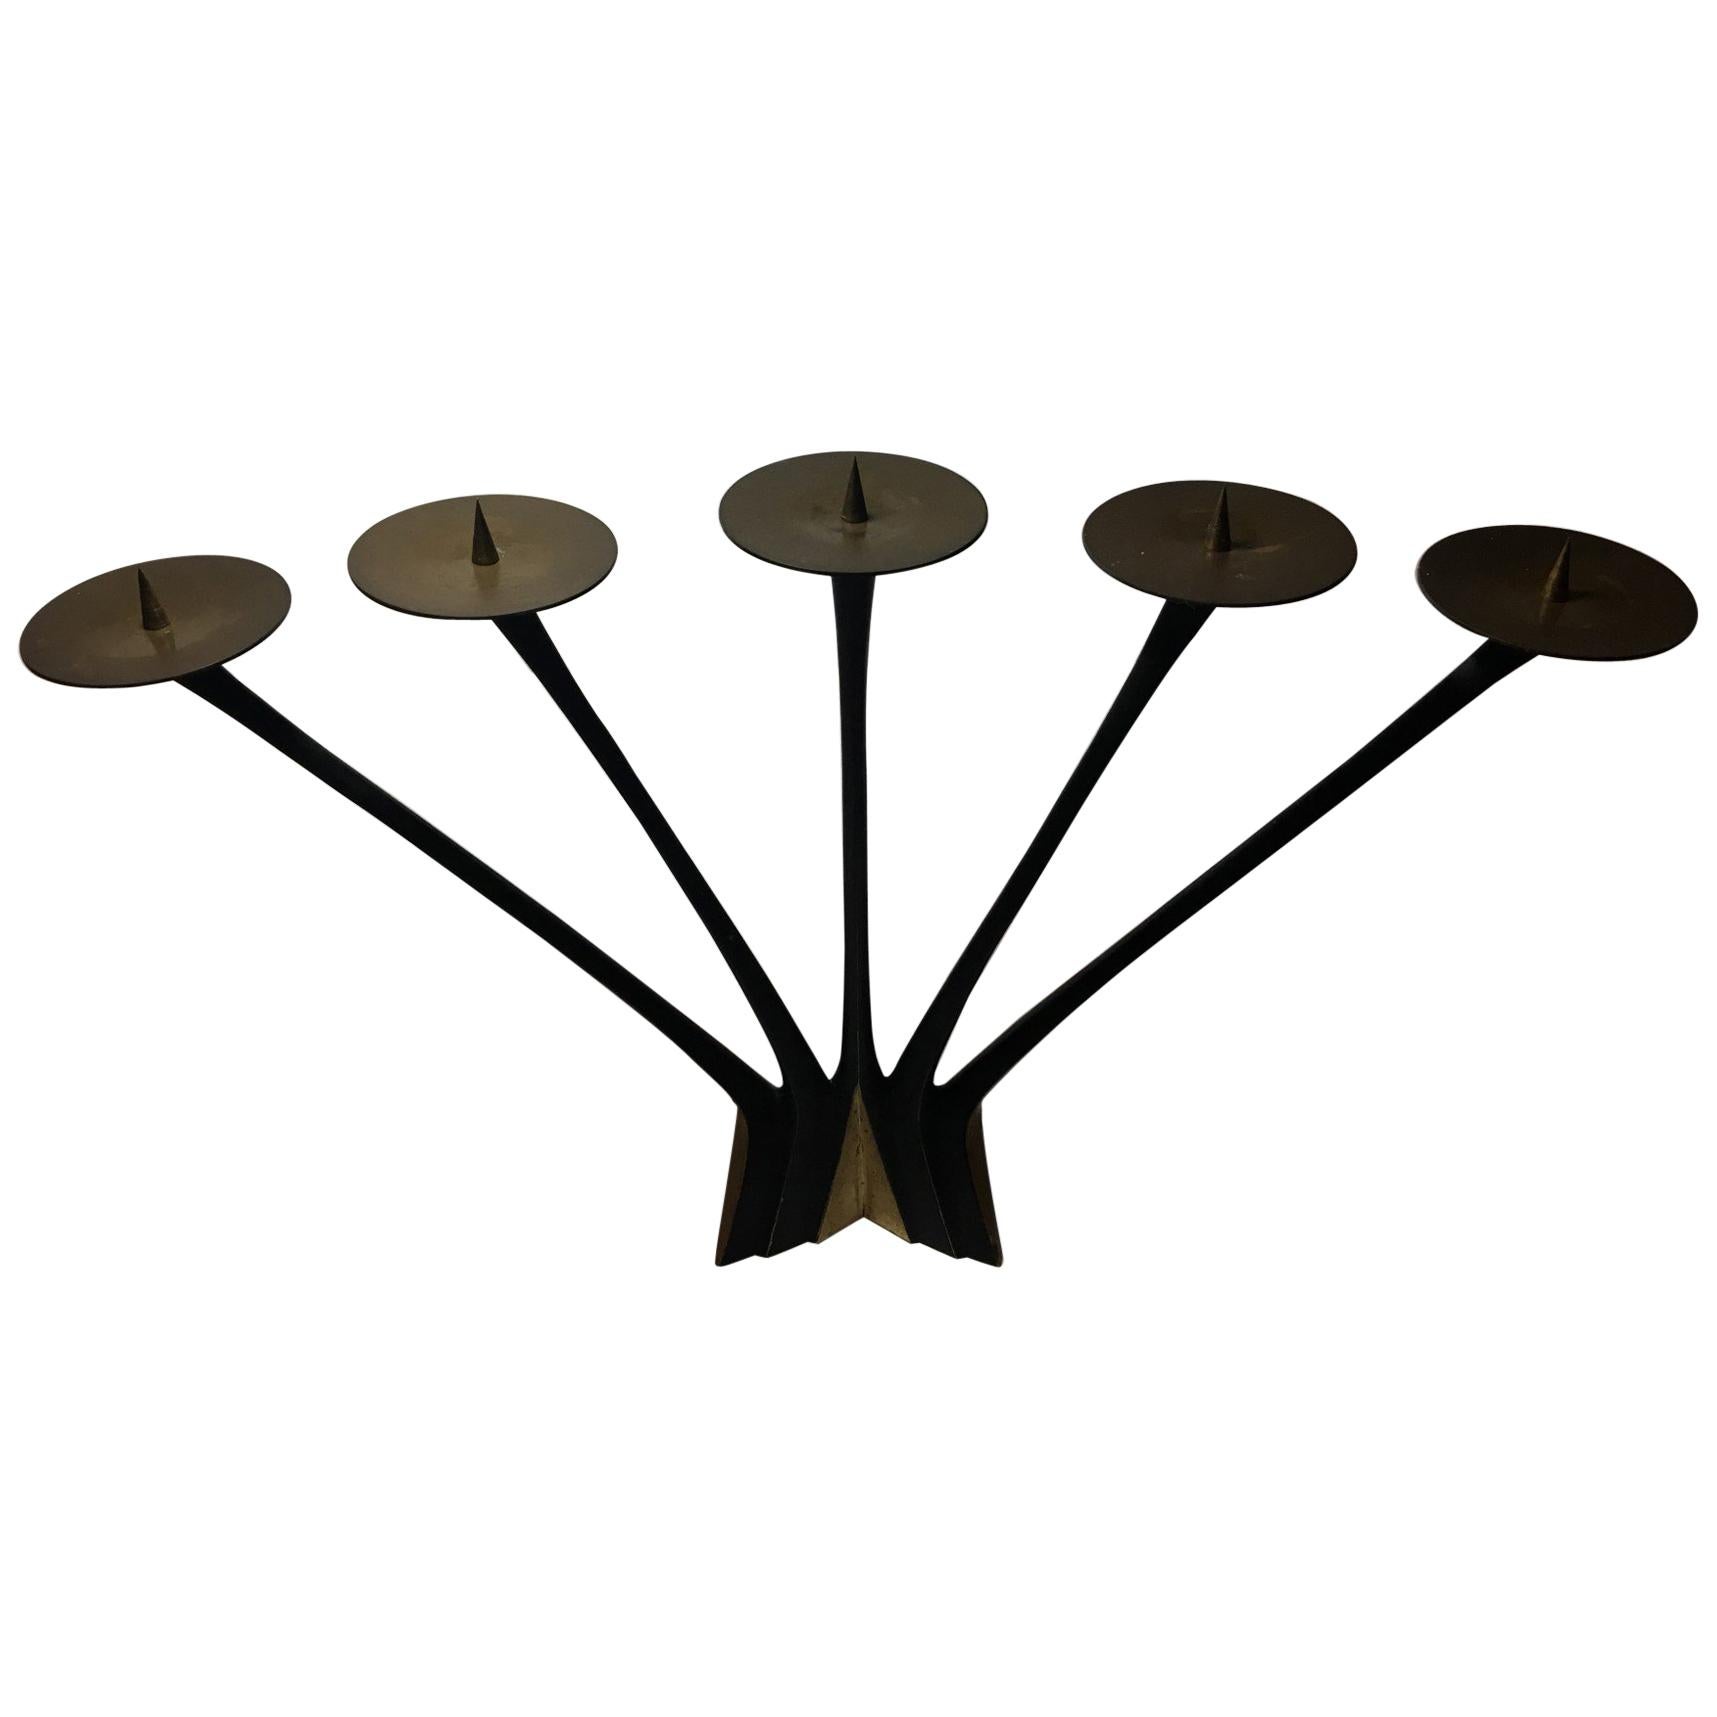 Brass Five-Armed Candleholder by Klaus Ullrich for Faber & Schumacher, 1950s For Sale